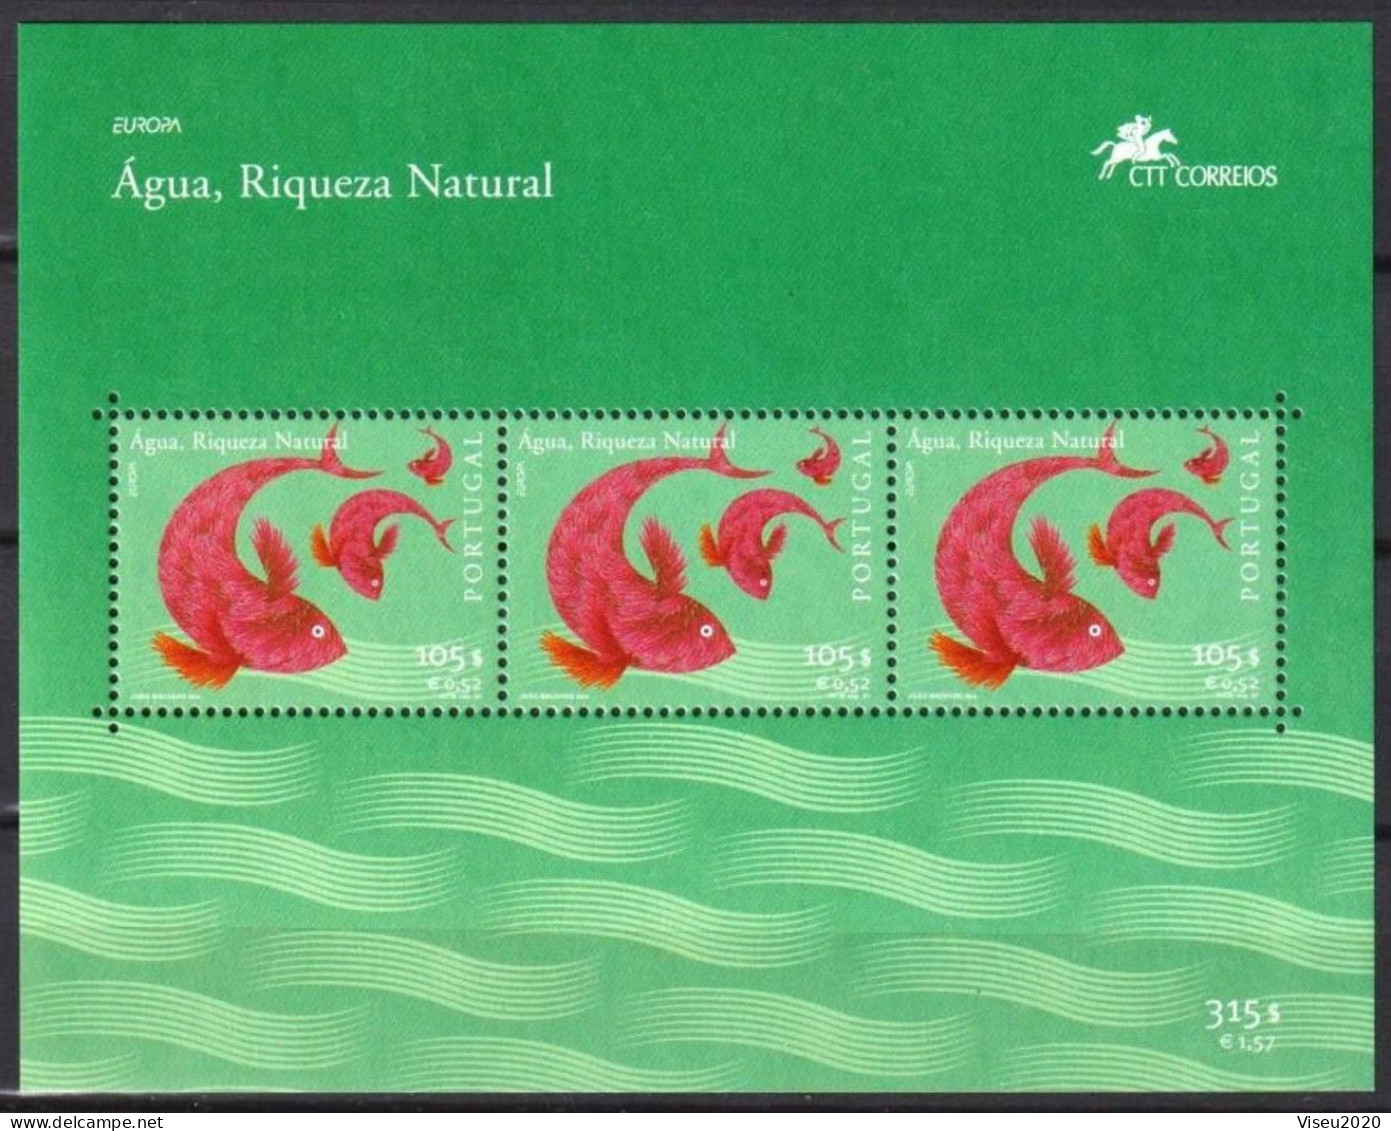 Portugal 2001 Afinsa 2771 Europoa CEPT - Water Treasure Of Nature Bloco Af 240 - MNH - Neufs